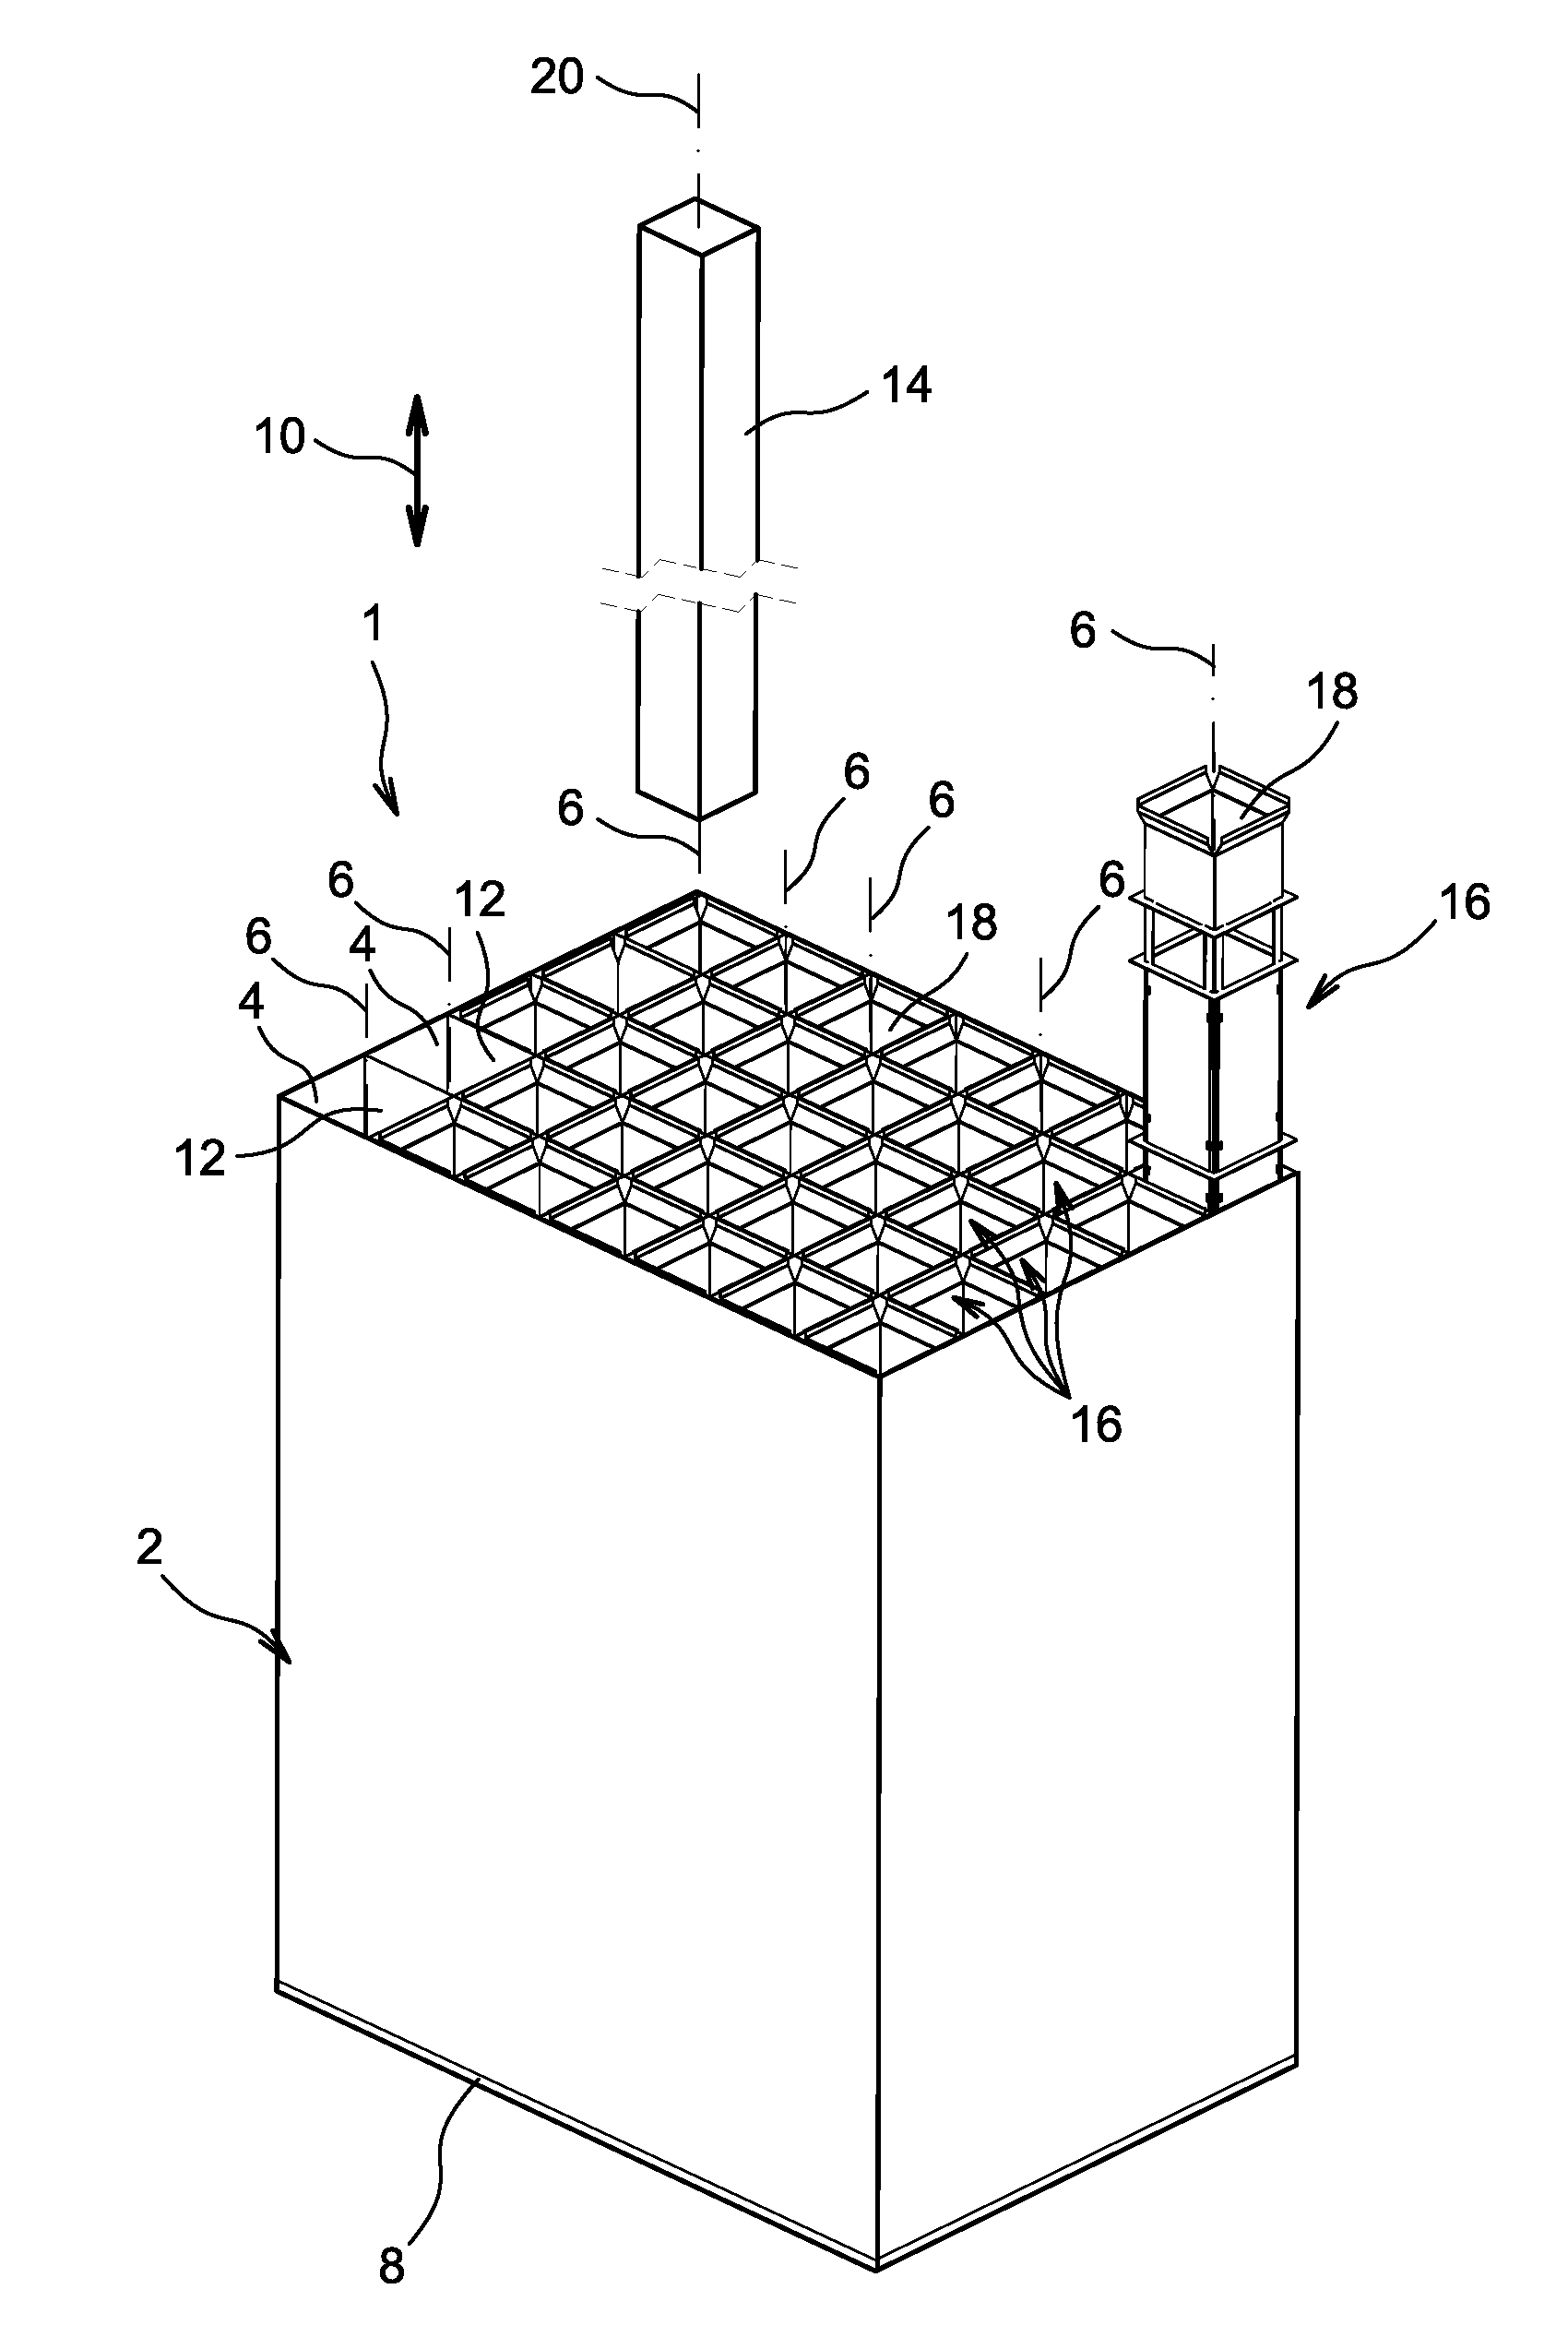 Storage rack for fresh or spent nuclear fuel assemblies